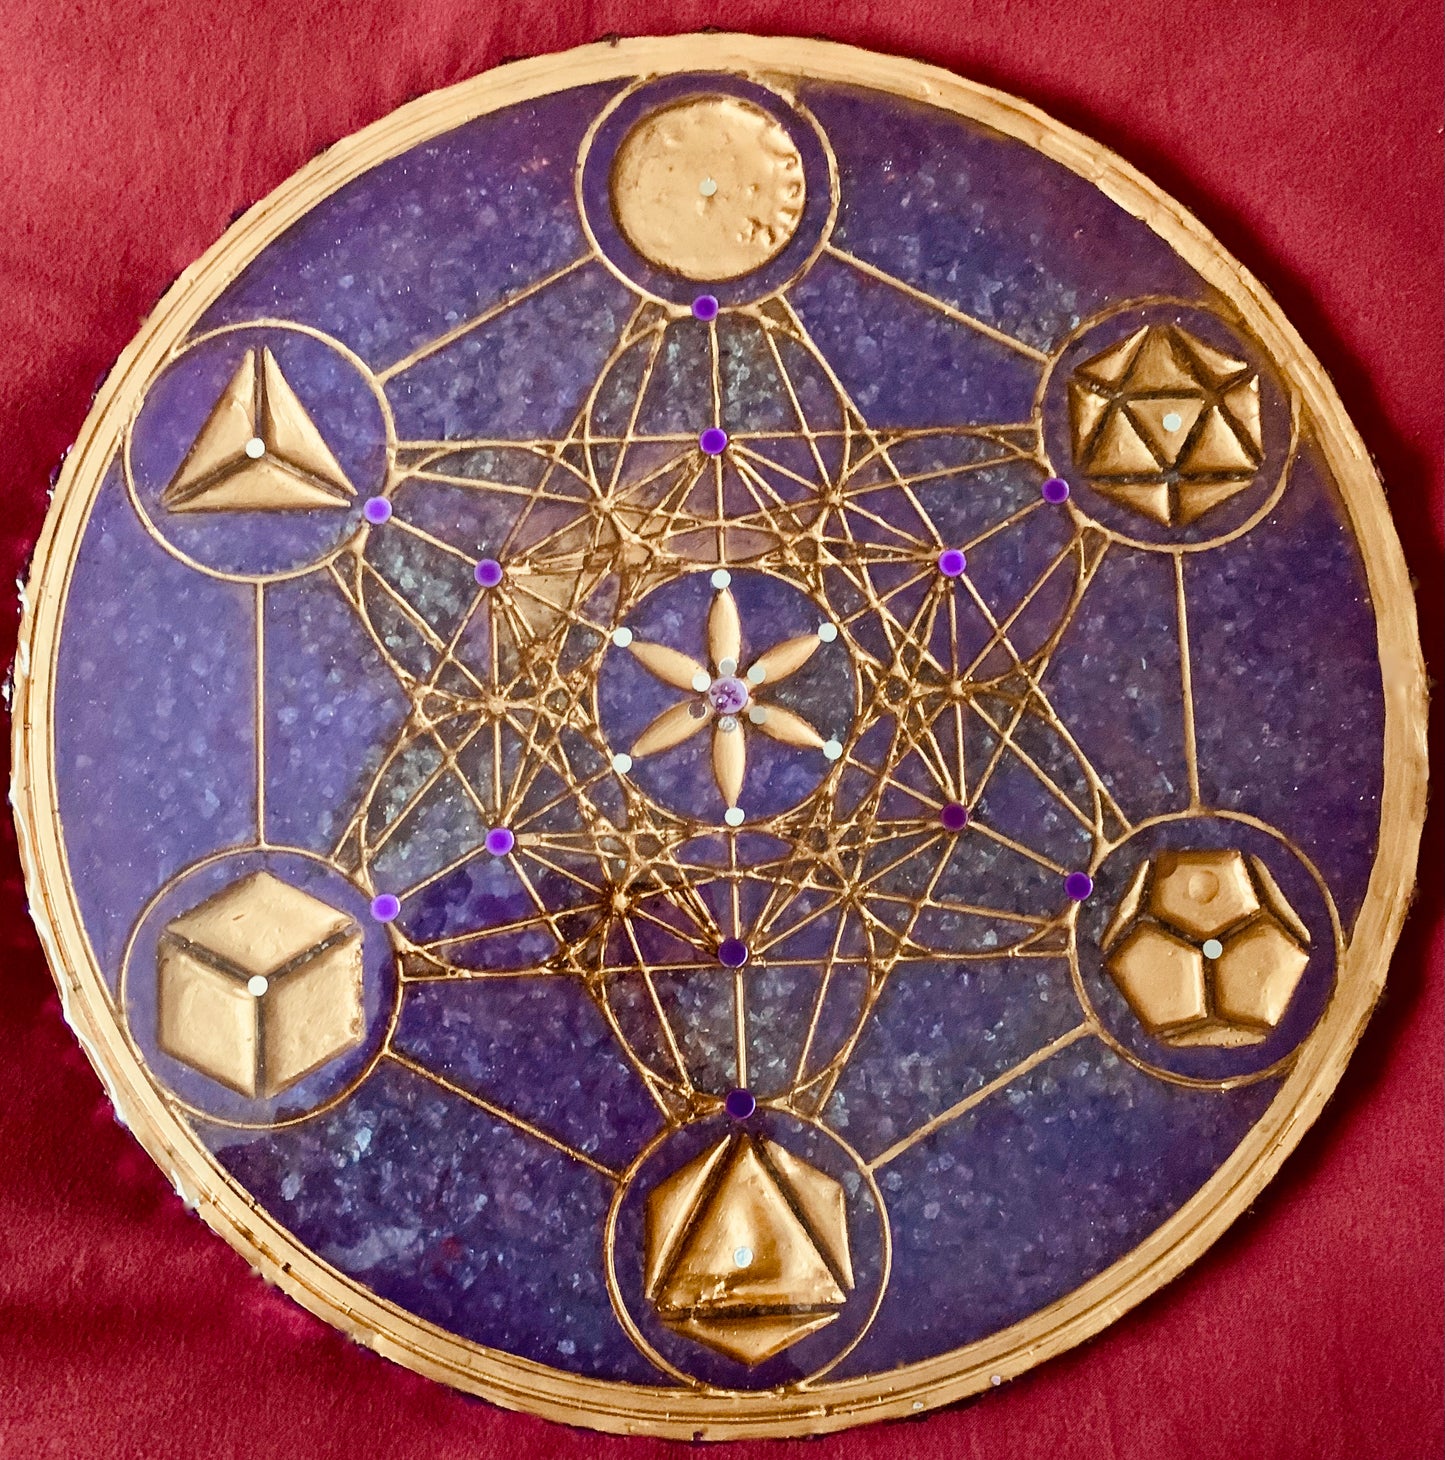 🔴SOLD🔴Handmade Sacred Geometry Art Altar Plate with Crushed Glass and Epoxy Resin